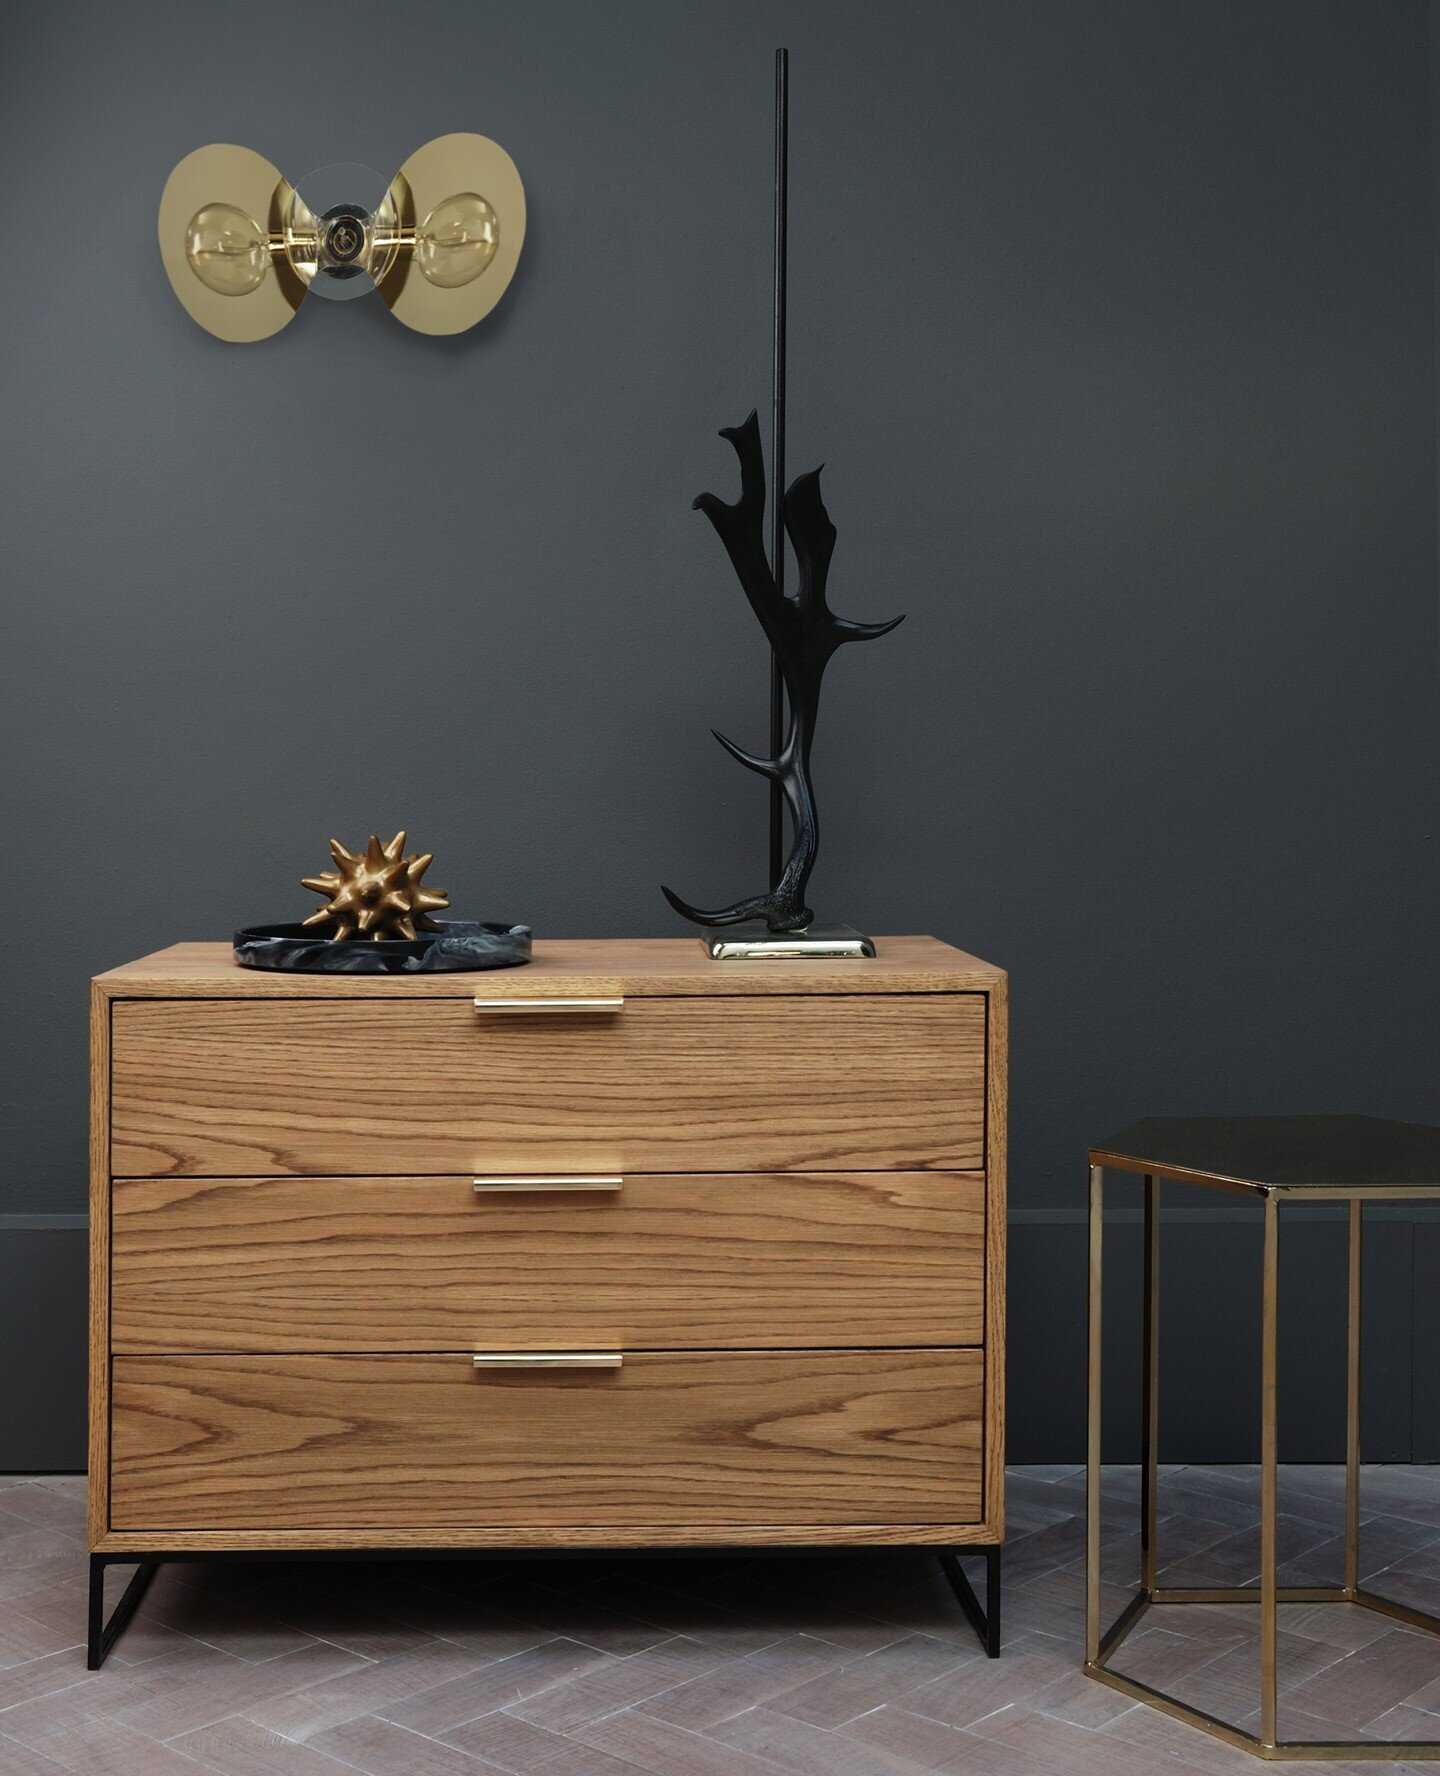 A storage solution but make it design. ⁠
⁠
This 3 drawer unit could be used in an office, entrance, or as a bedside table. Any little corner begging for some order, really. ⁠
⁠
Shop in the UK at www.philosophyfurniture.com